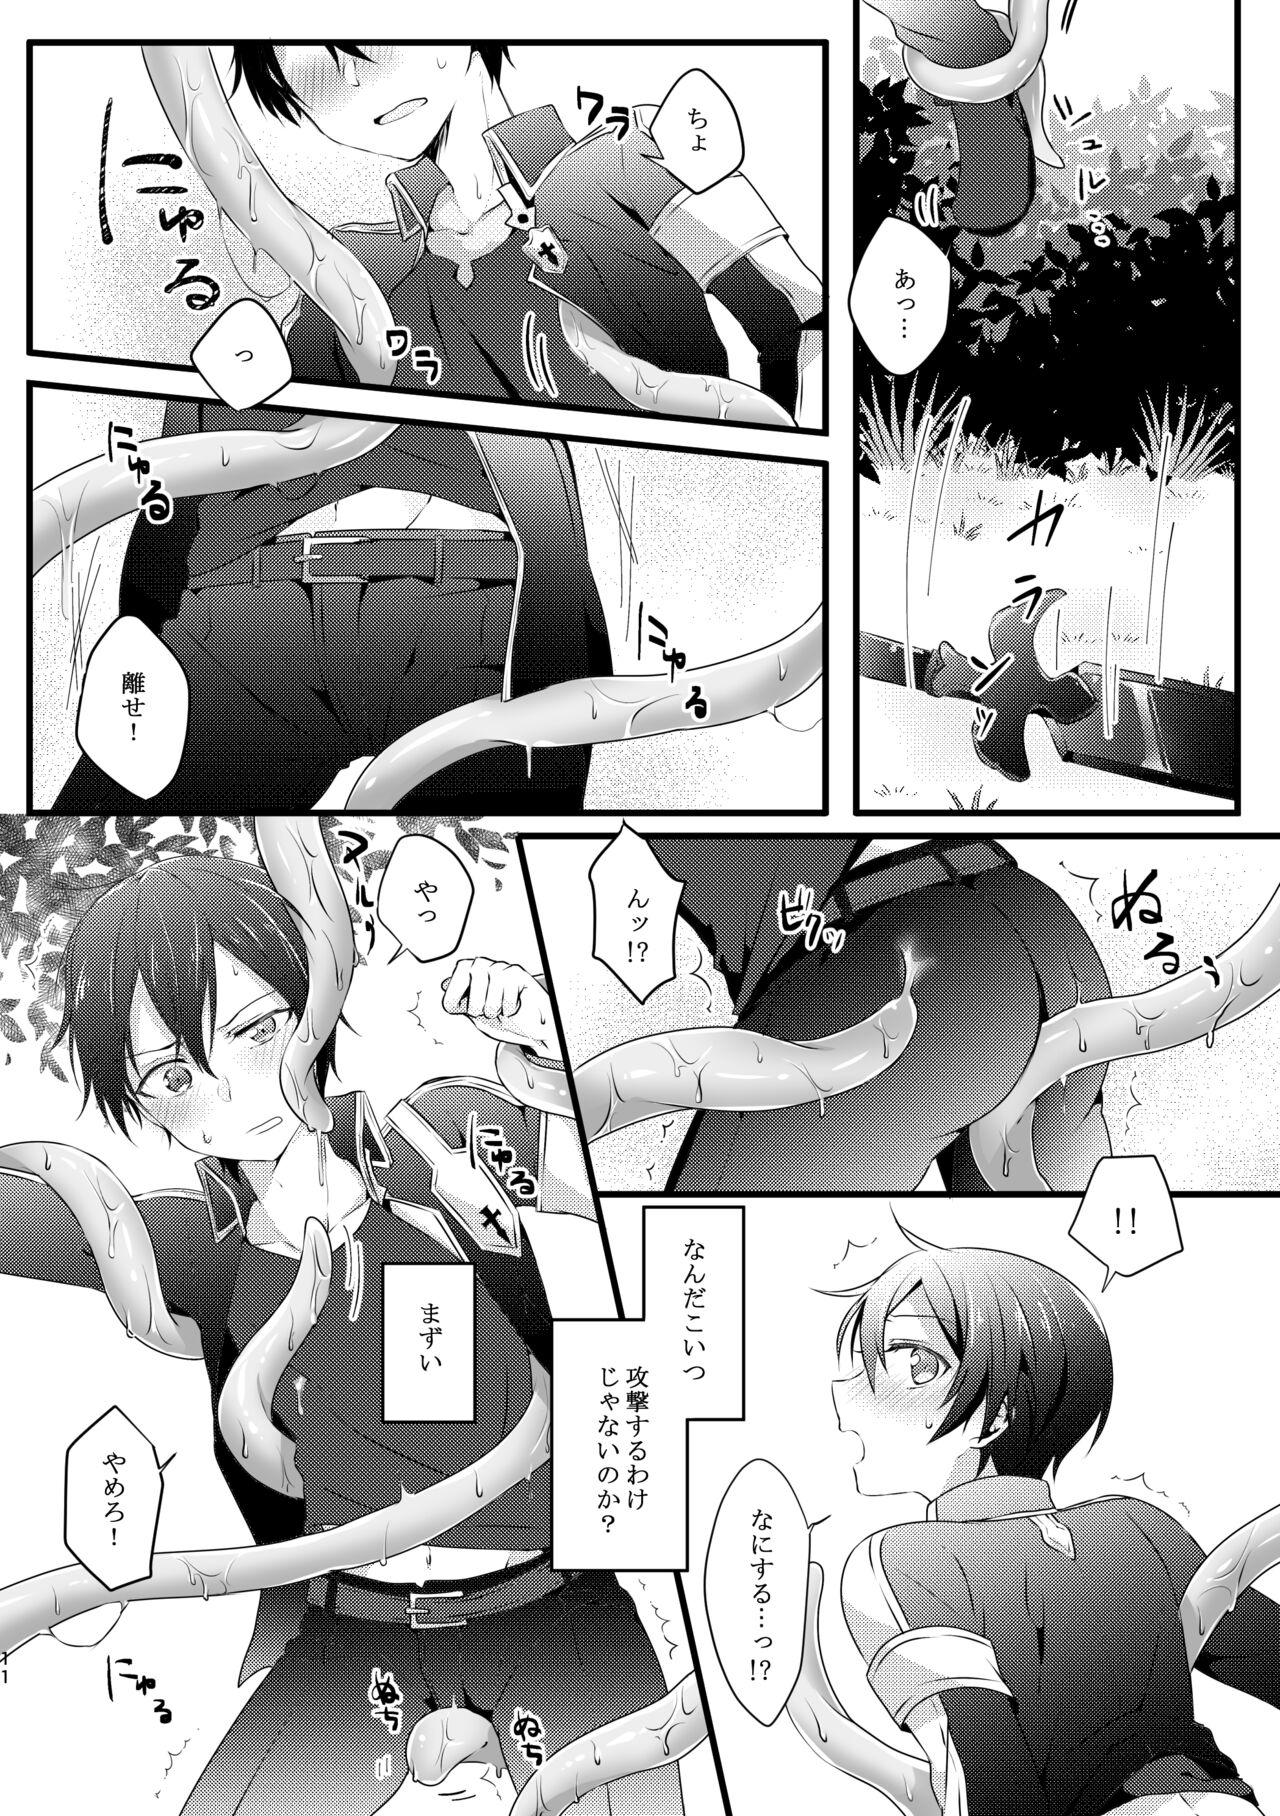 Para 触手ちゃんはユジキリが羨ましい！ - Sword art online Brother Sister - Page 10